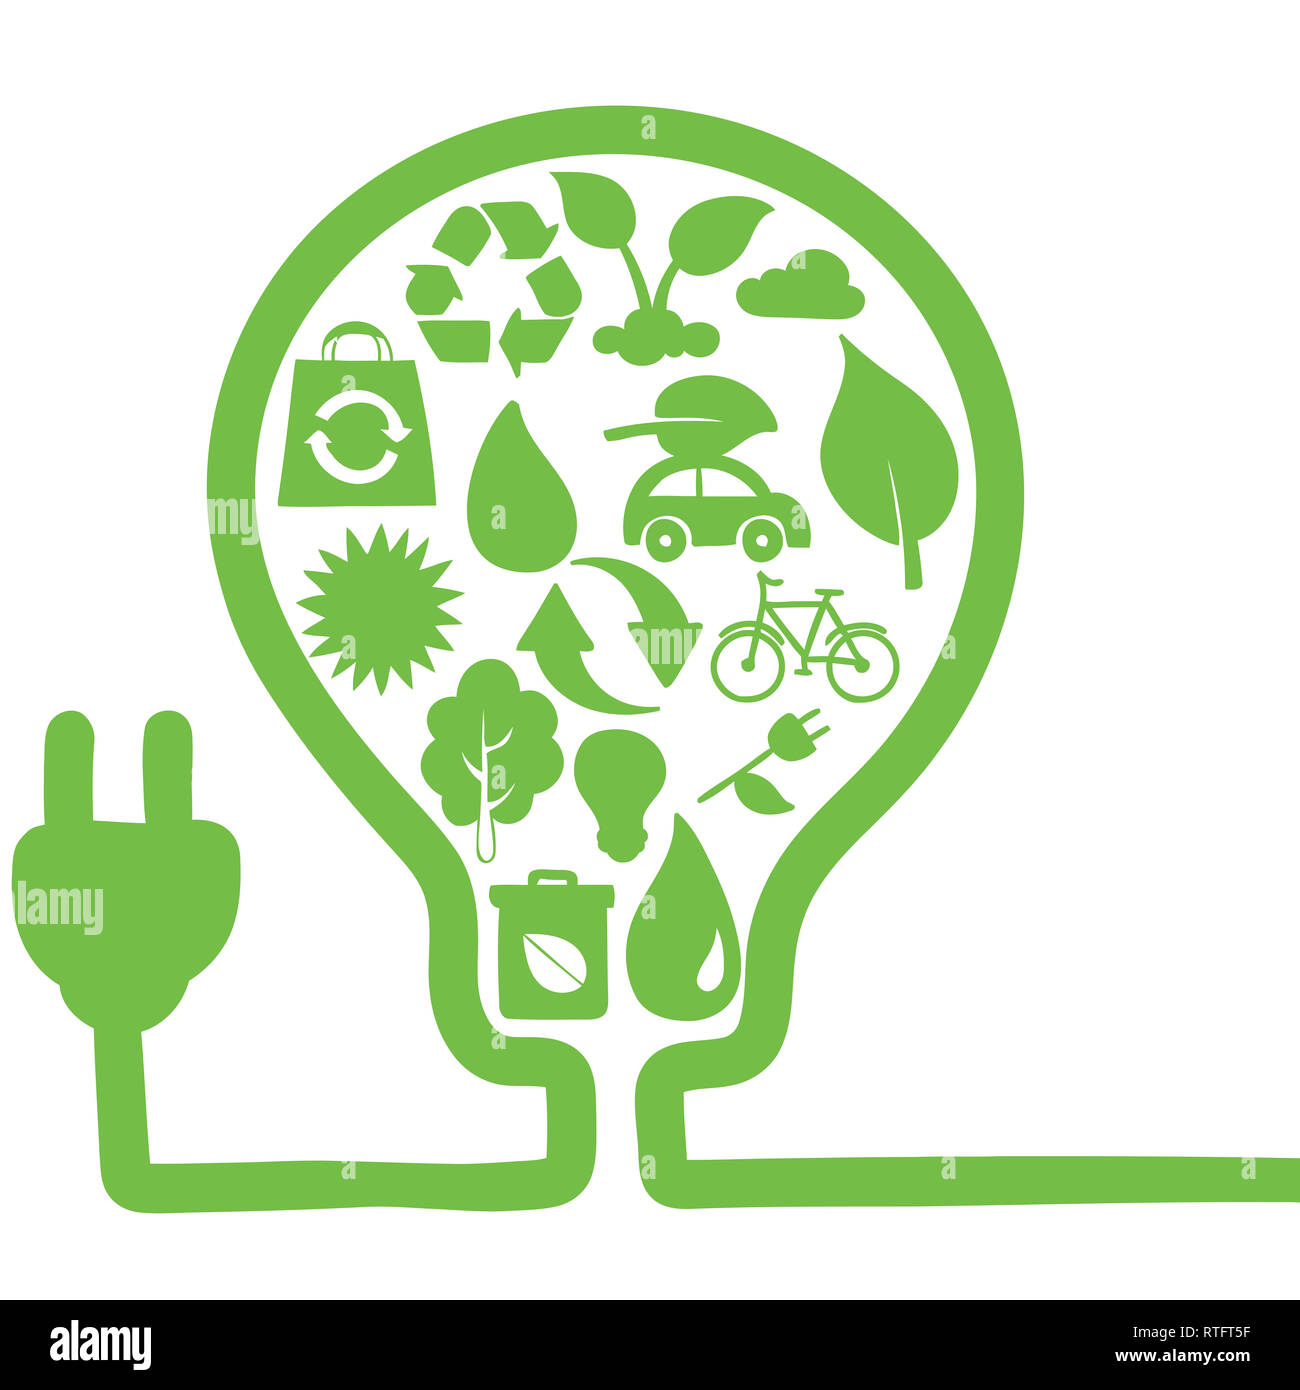 environmental protection friendly green save earth conservation energy lightbulb illustration Stock Photo